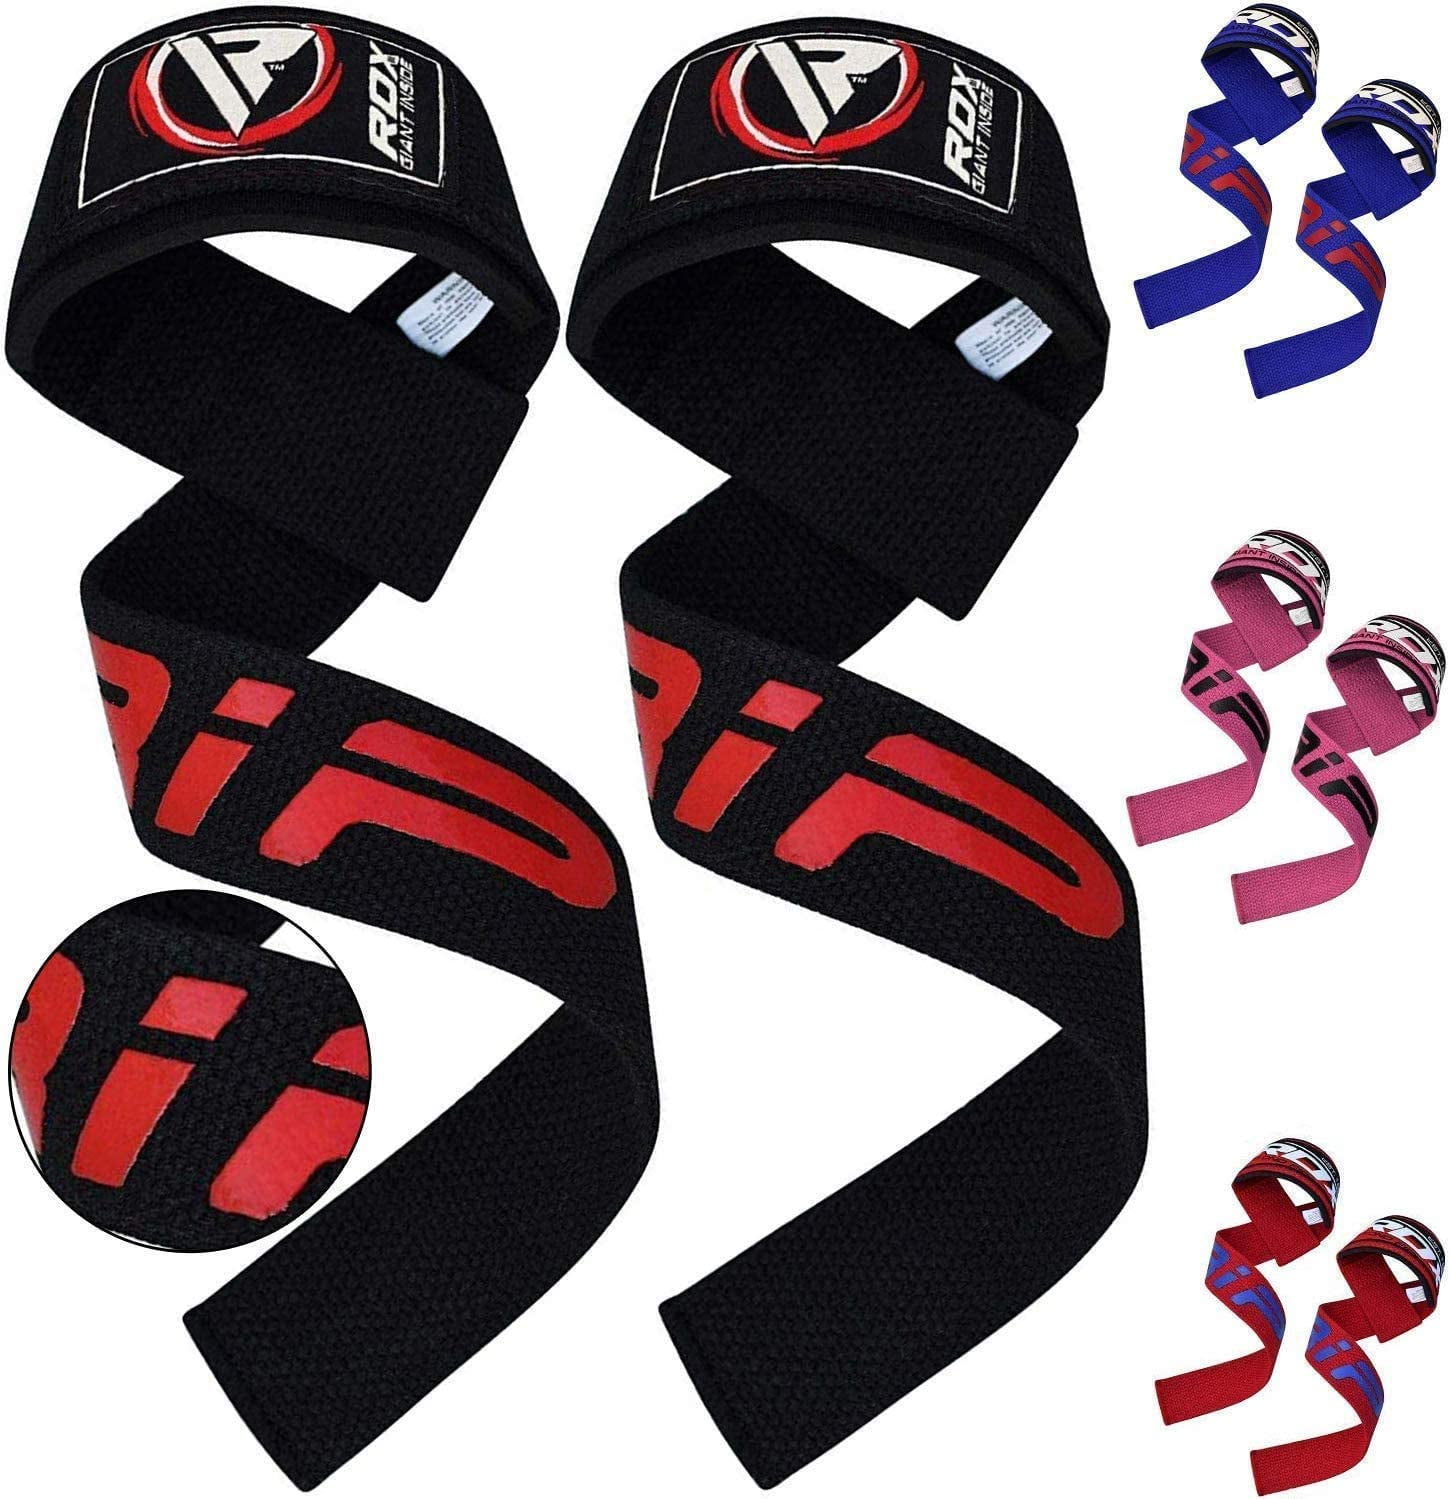 Power Weight Lifting Training Gym Straps Hand Bar Wrist Support Gloves Wrap 